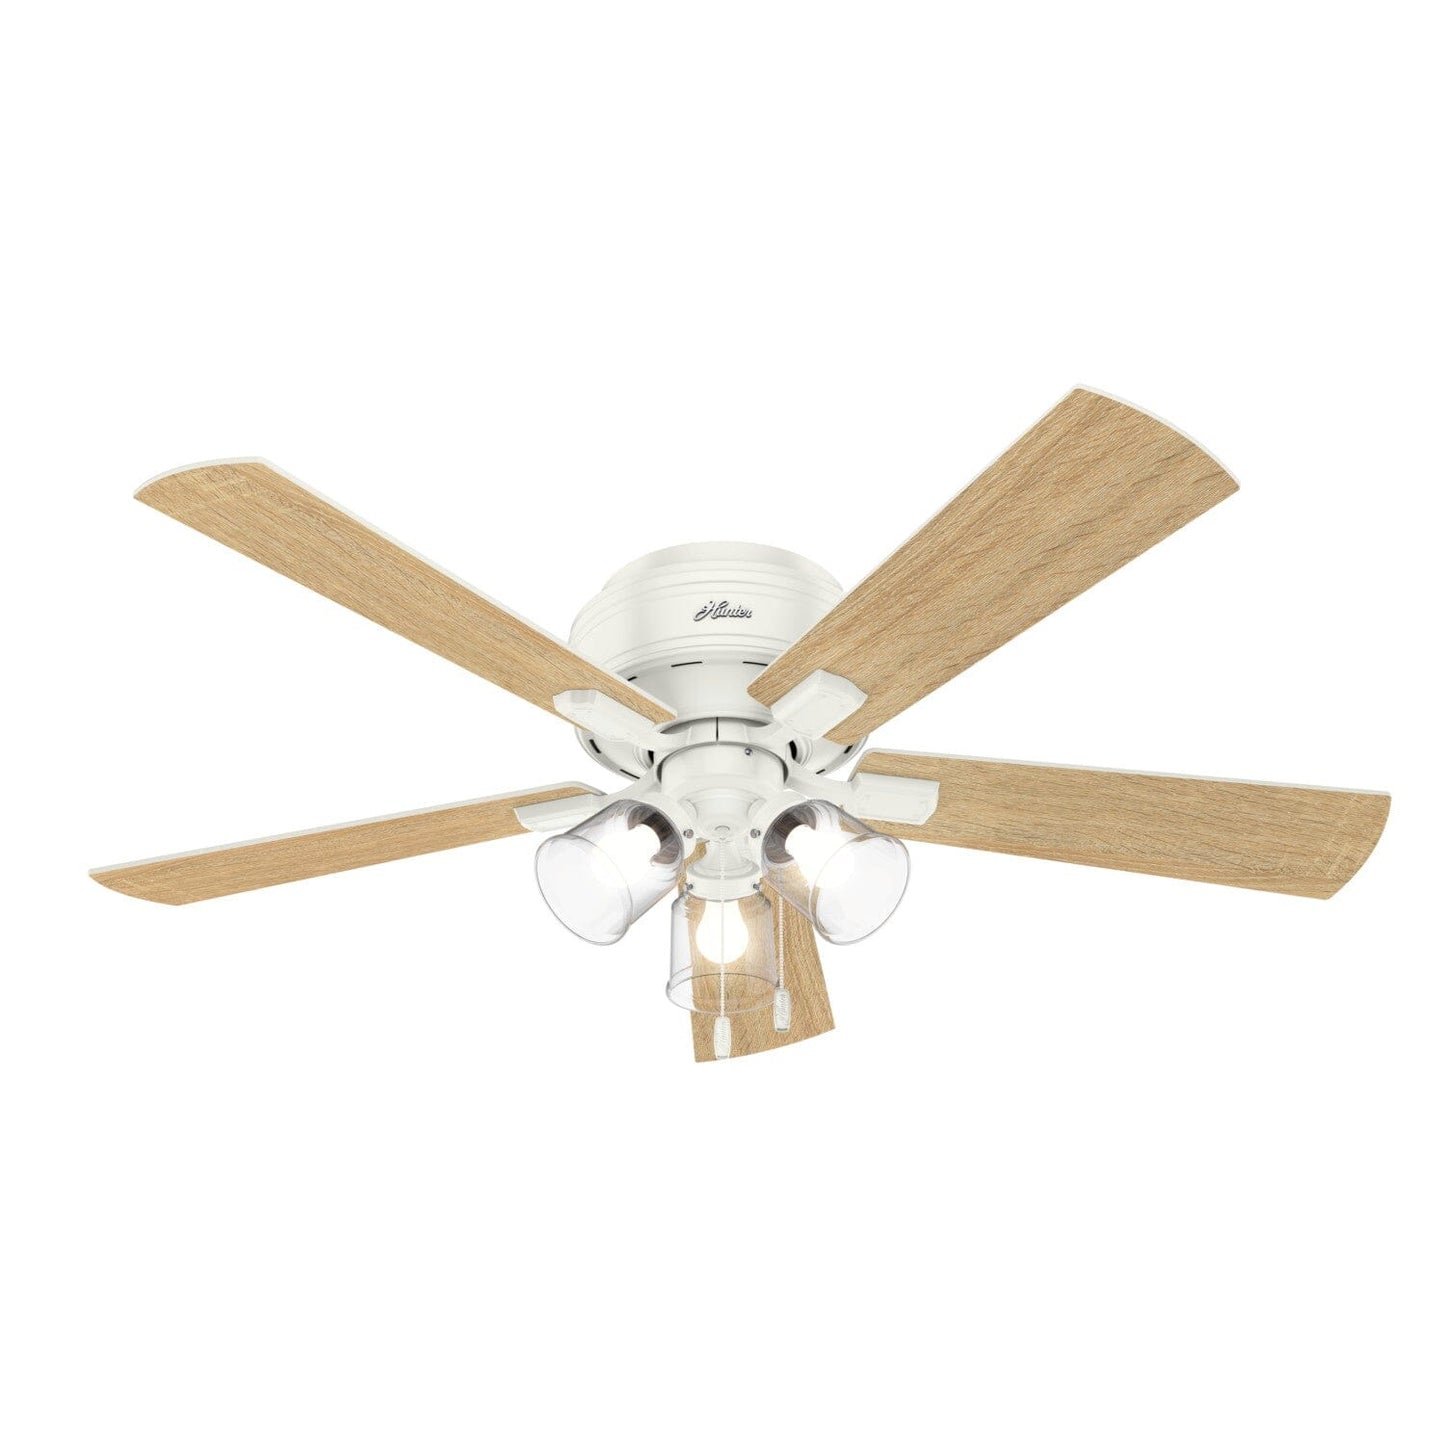 Crestfield Low Profile with 3 LED Lights 52 inch Ceiling Fans Hunter Fresh White - Fresh White 